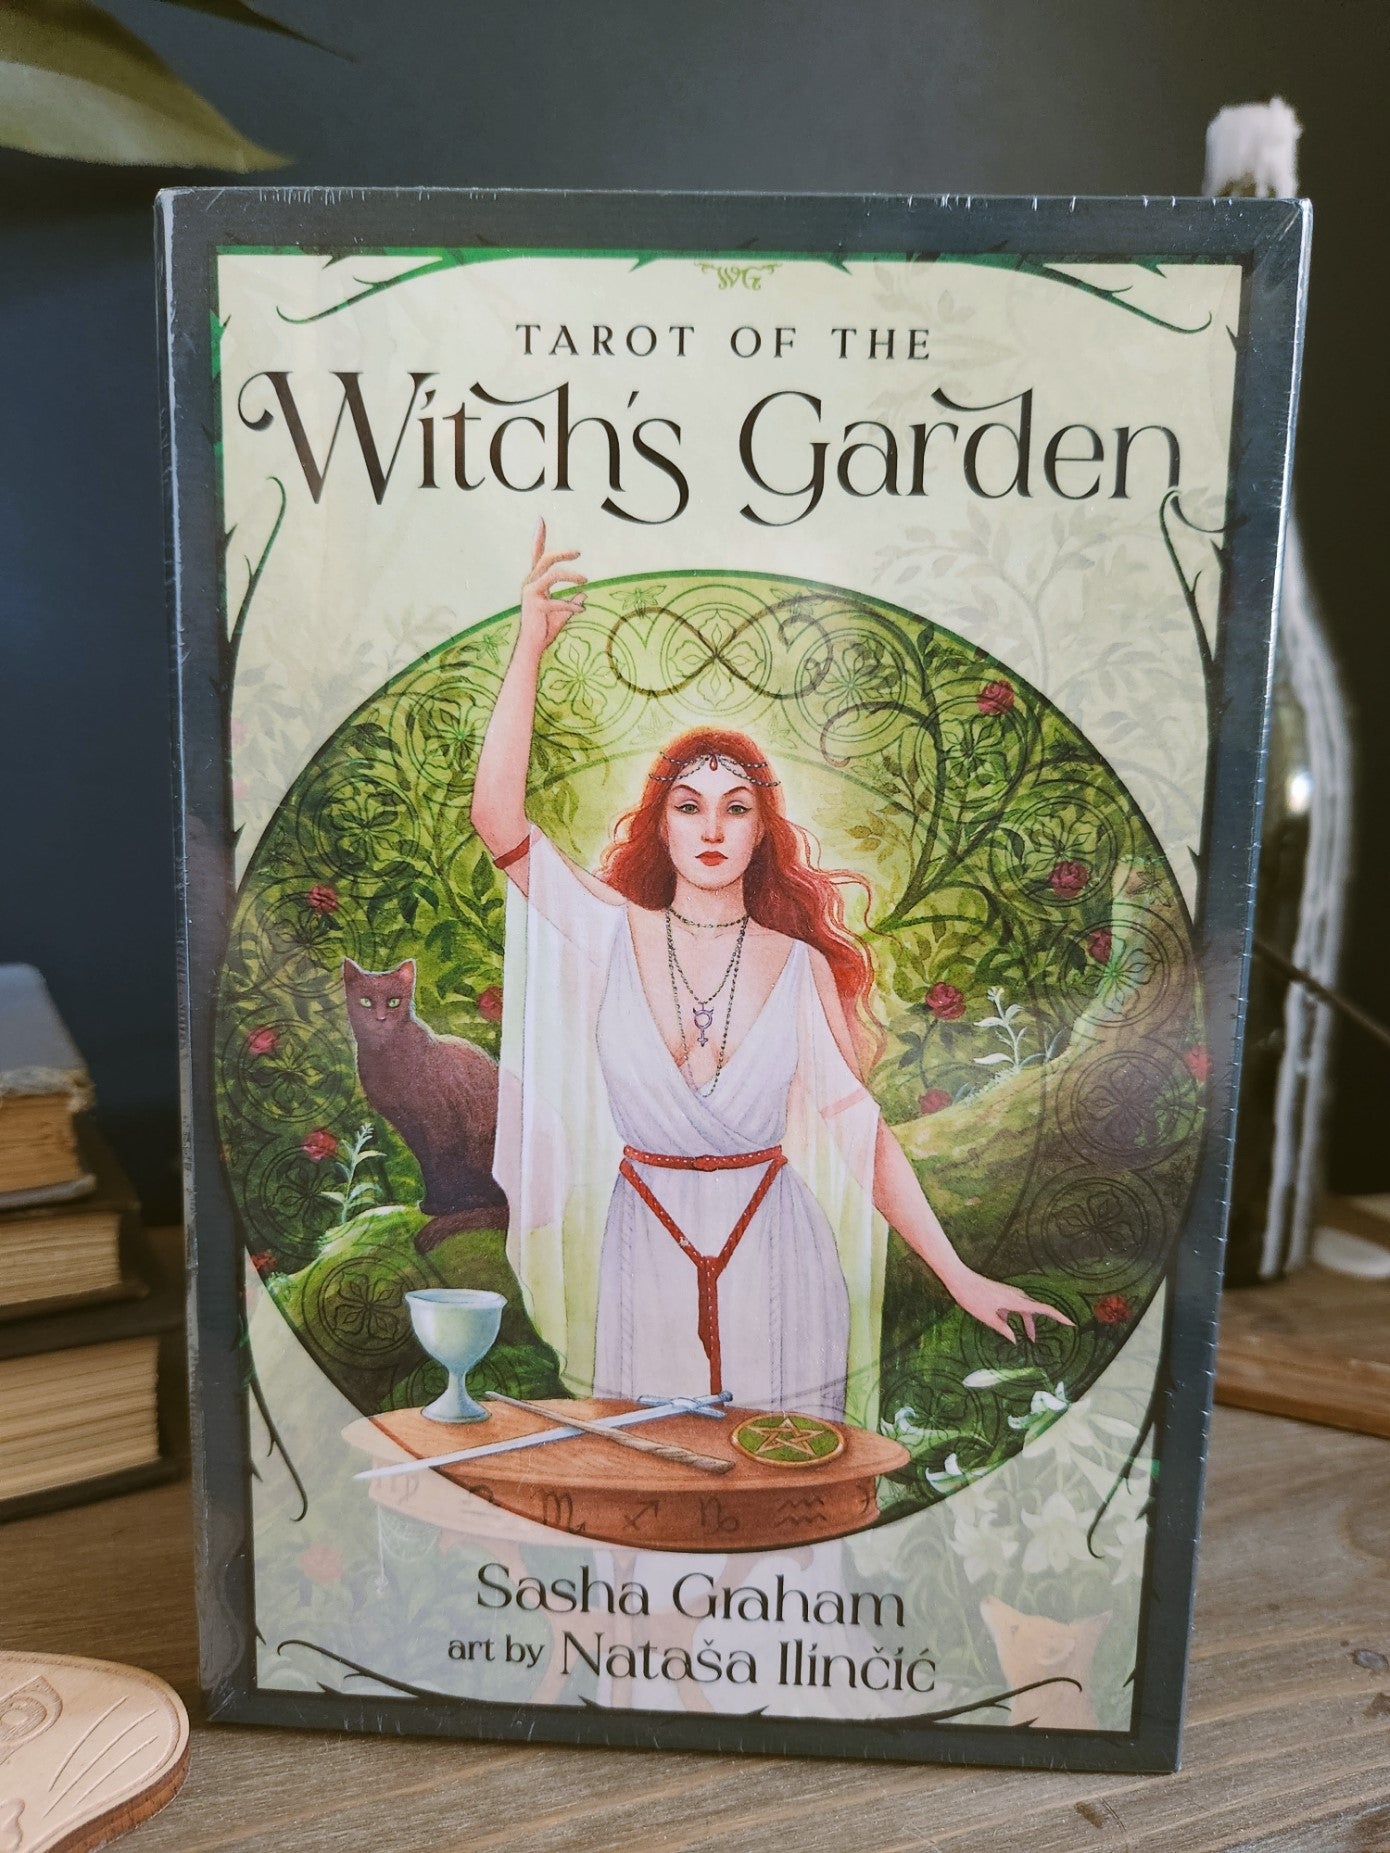 Tarot of the Witch's Garden